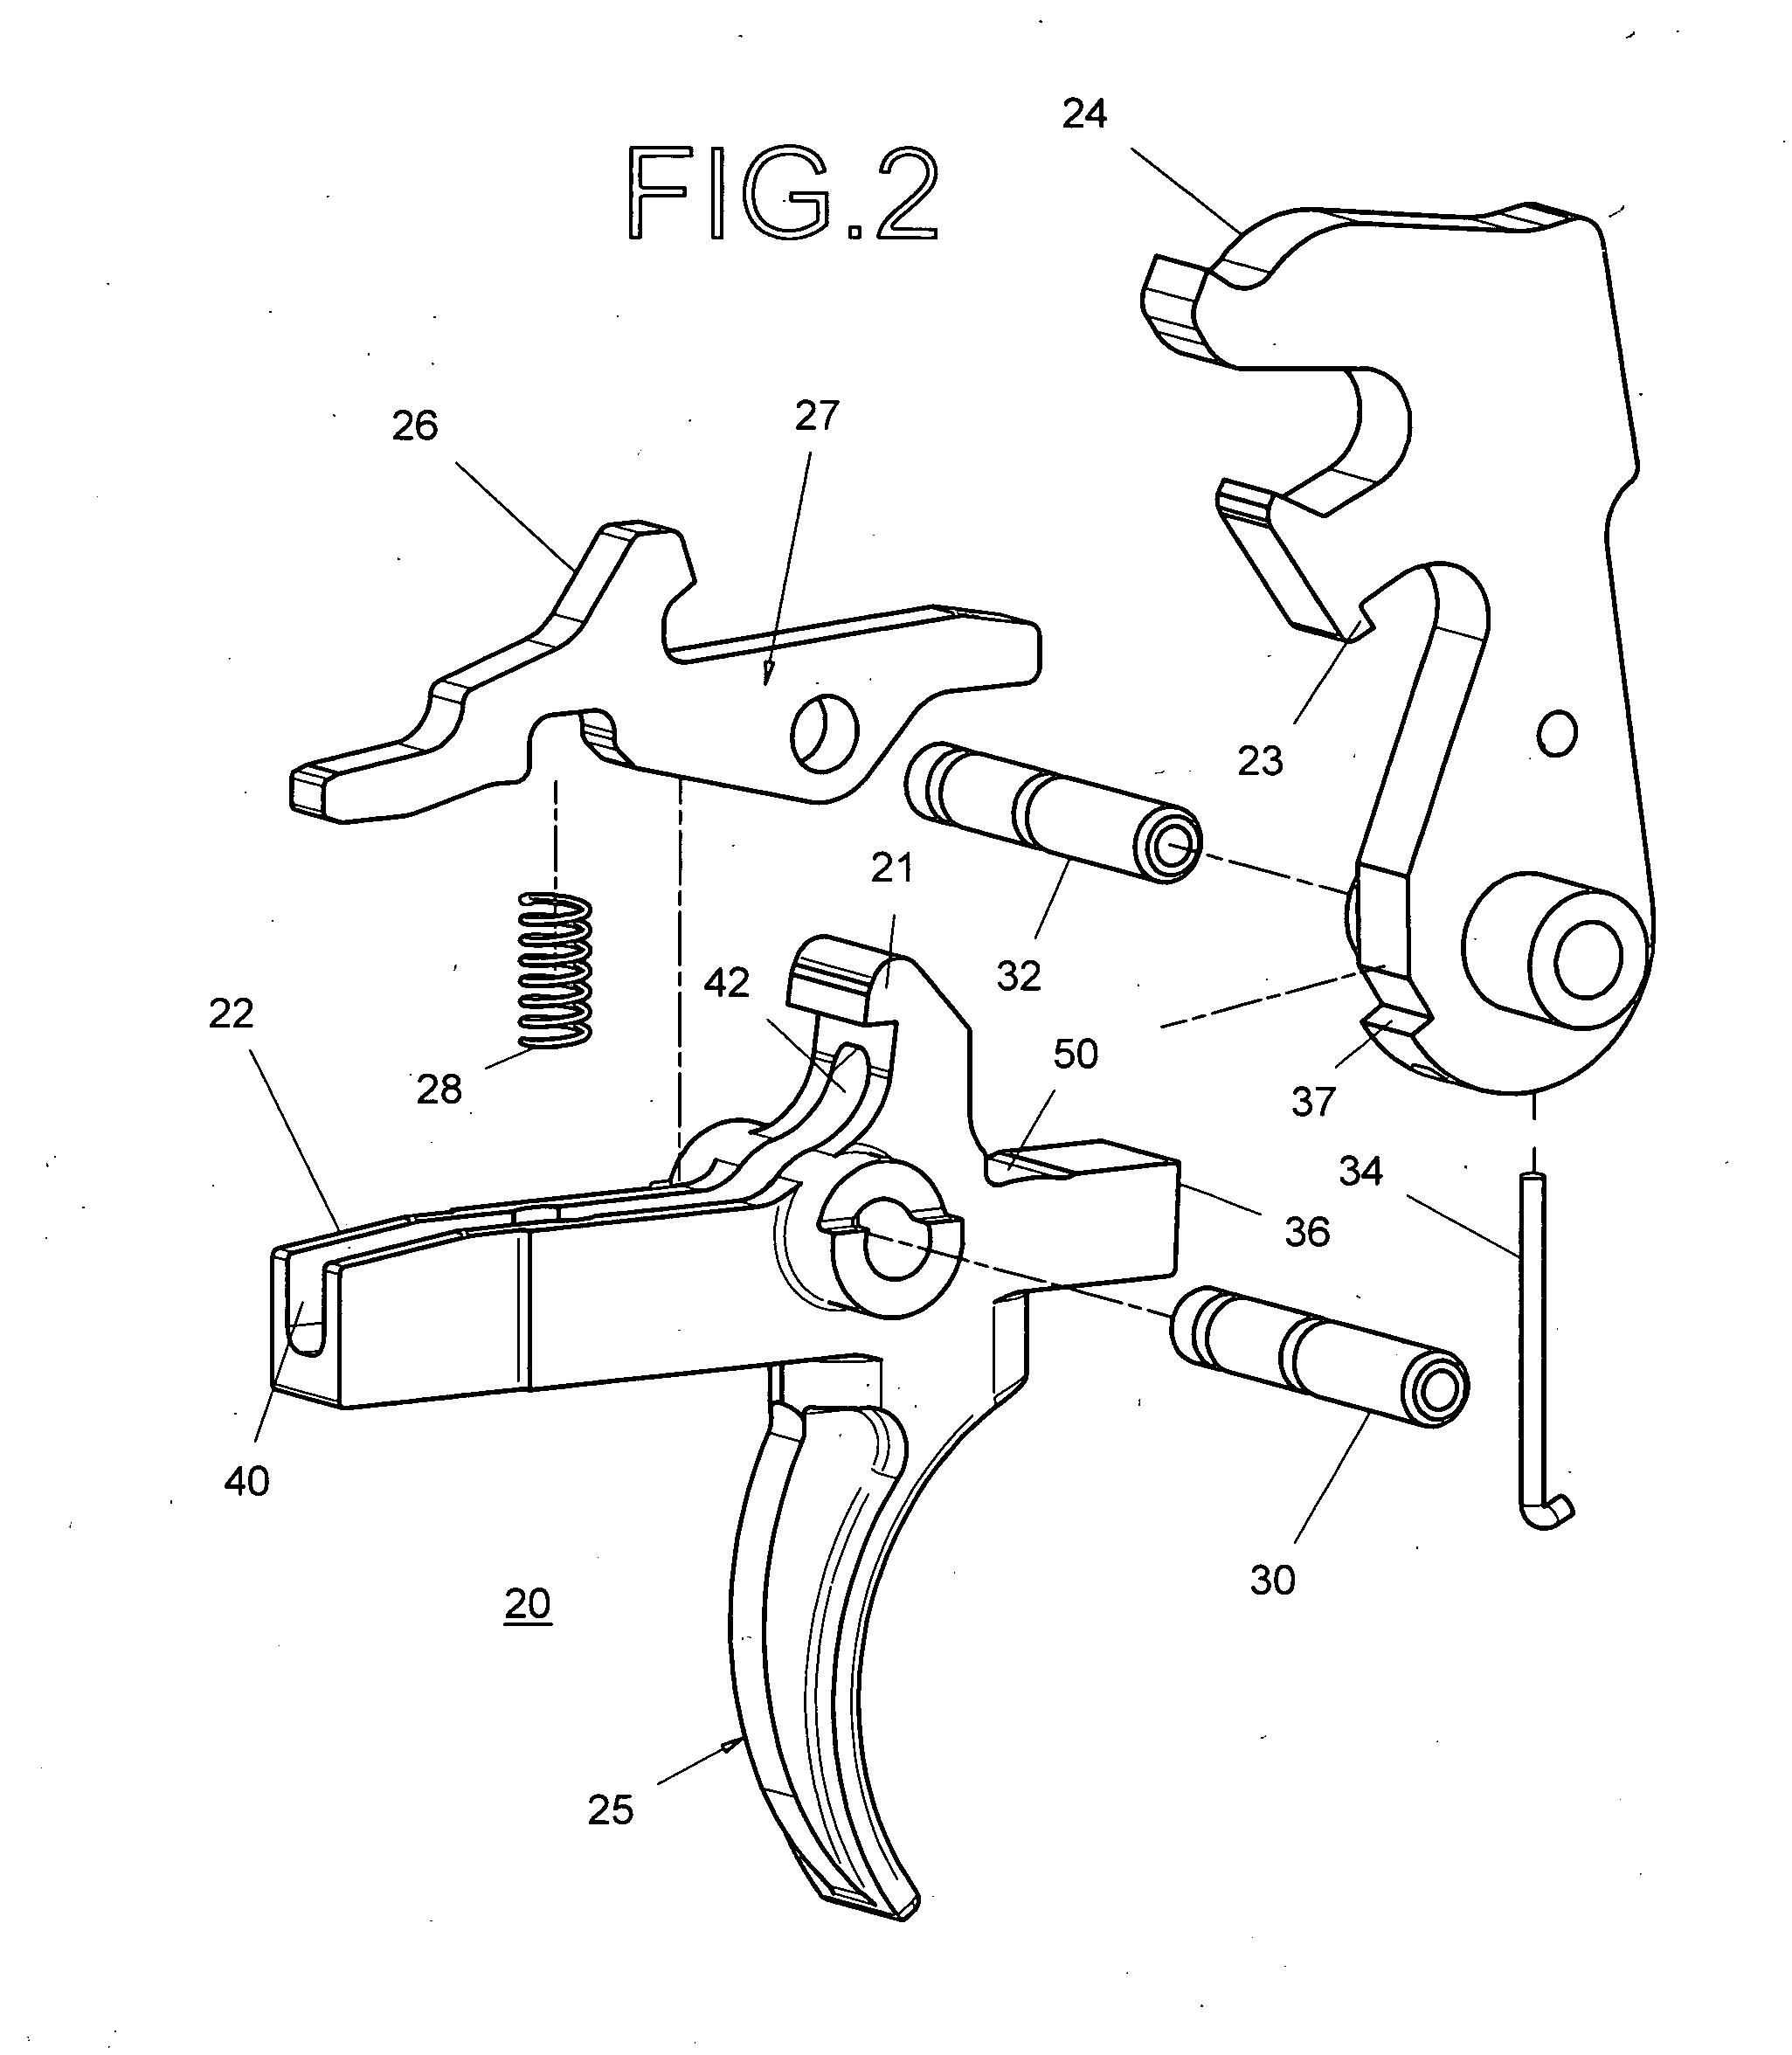 Multi-stage trigger for automatic weapons